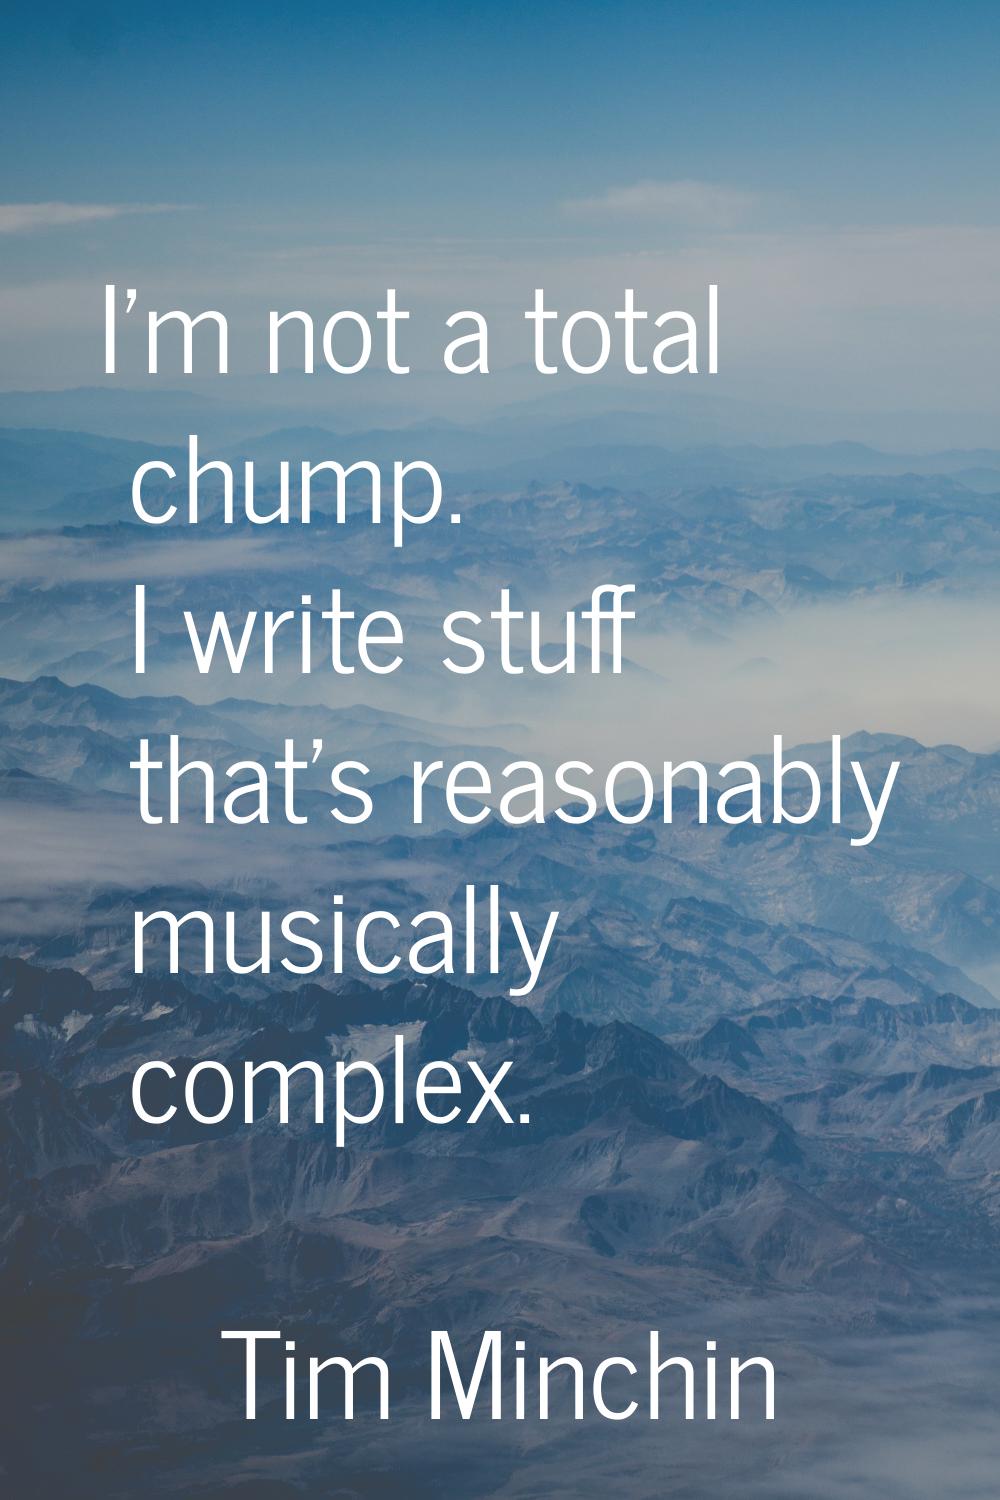 I'm not a total chump. I write stuff that's reasonably musically complex.